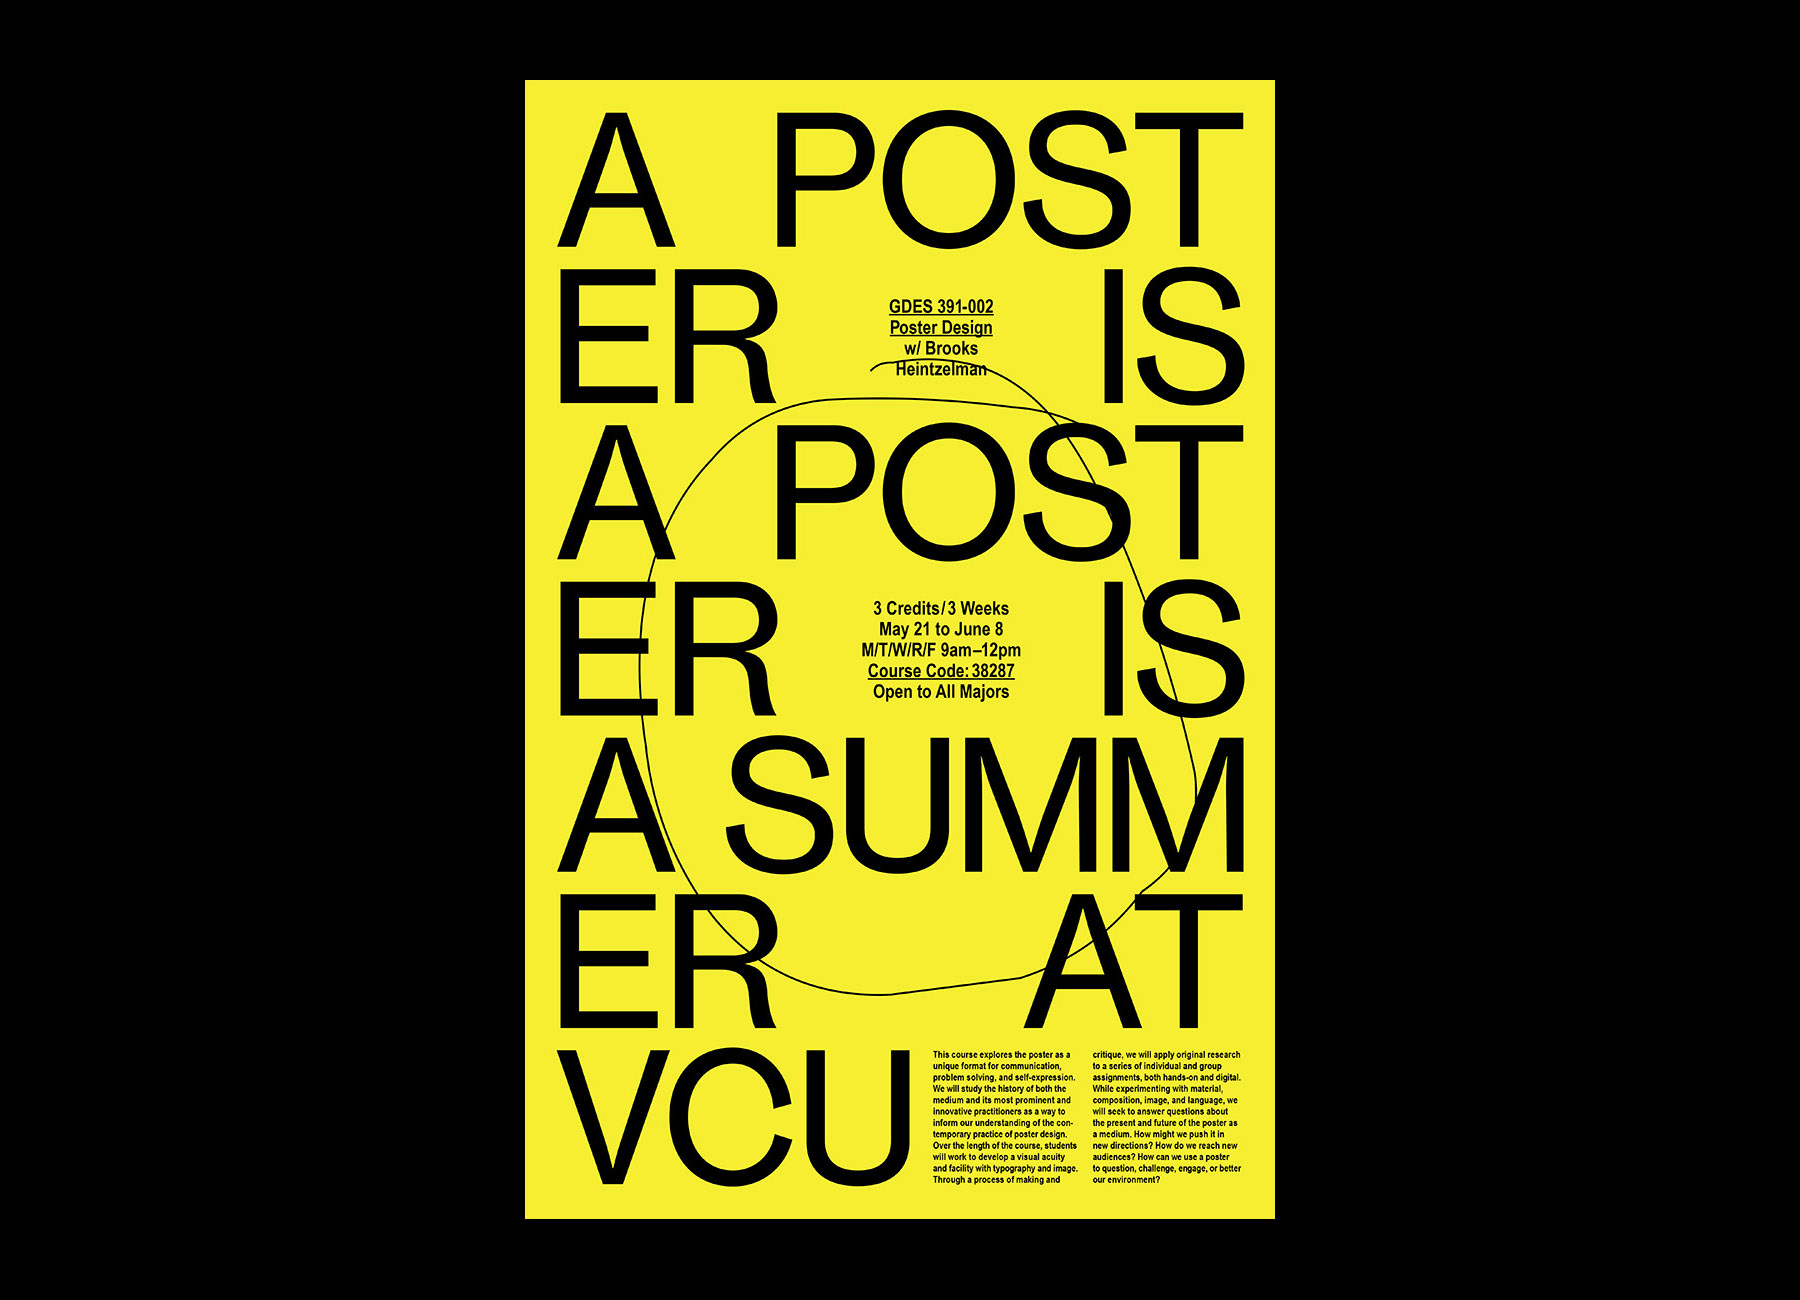 A Poster is a Poster is a Summer at VCU — Brooks Heintzelman, 2017